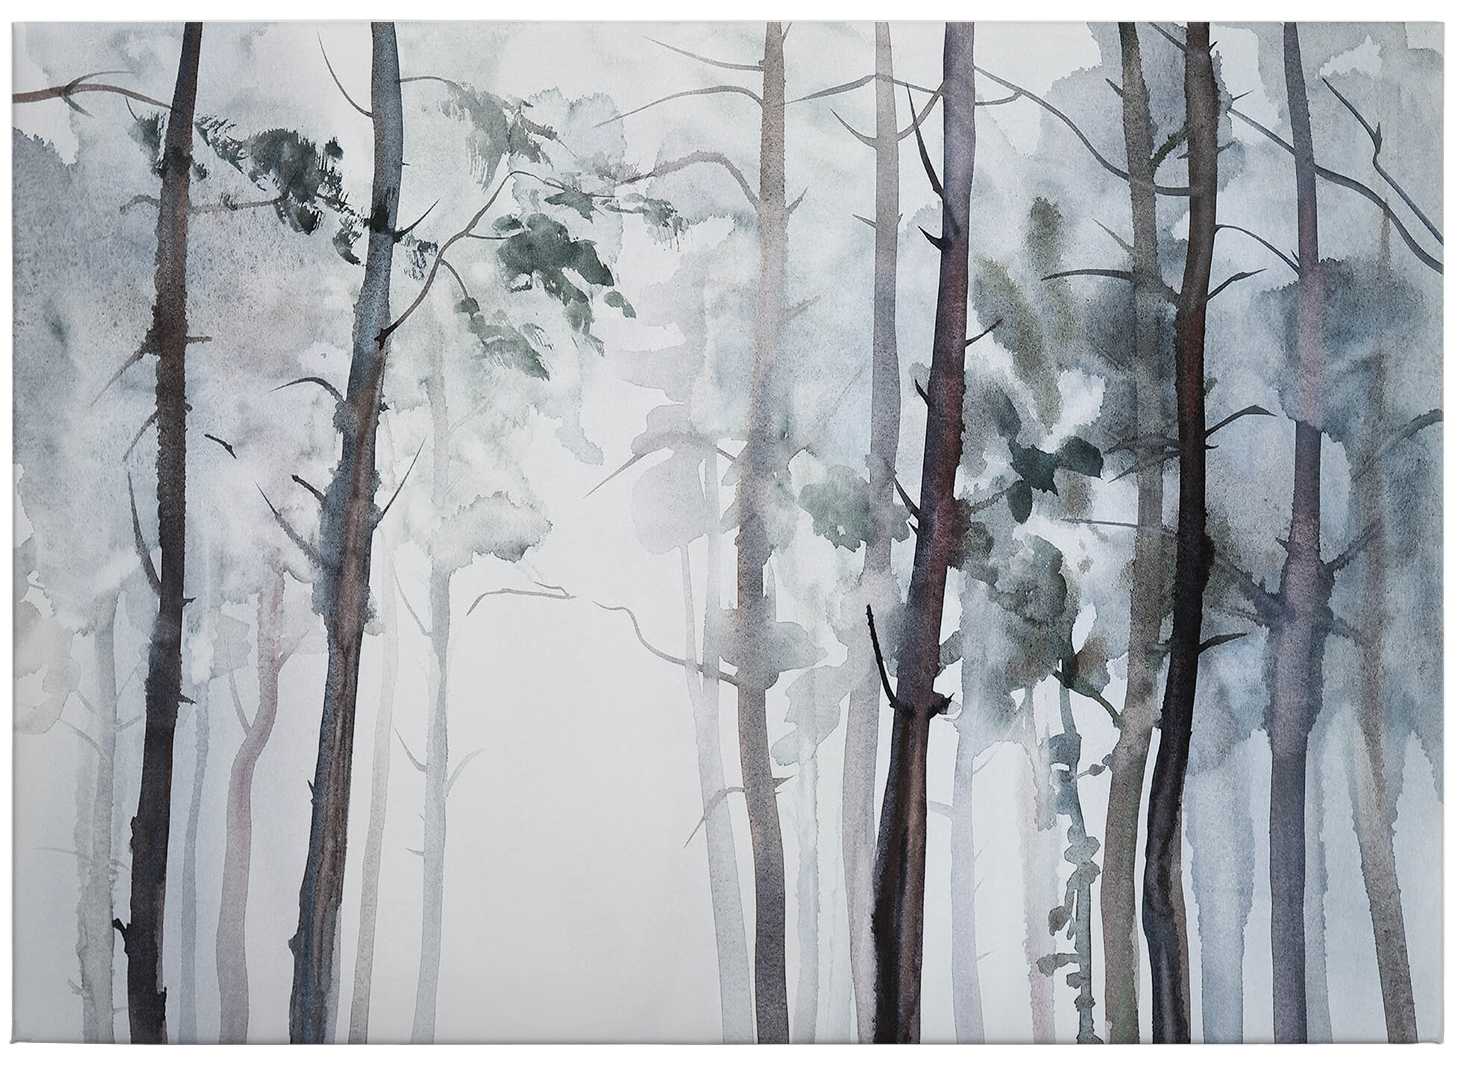             Canvas print watercolour forest – black and white
        